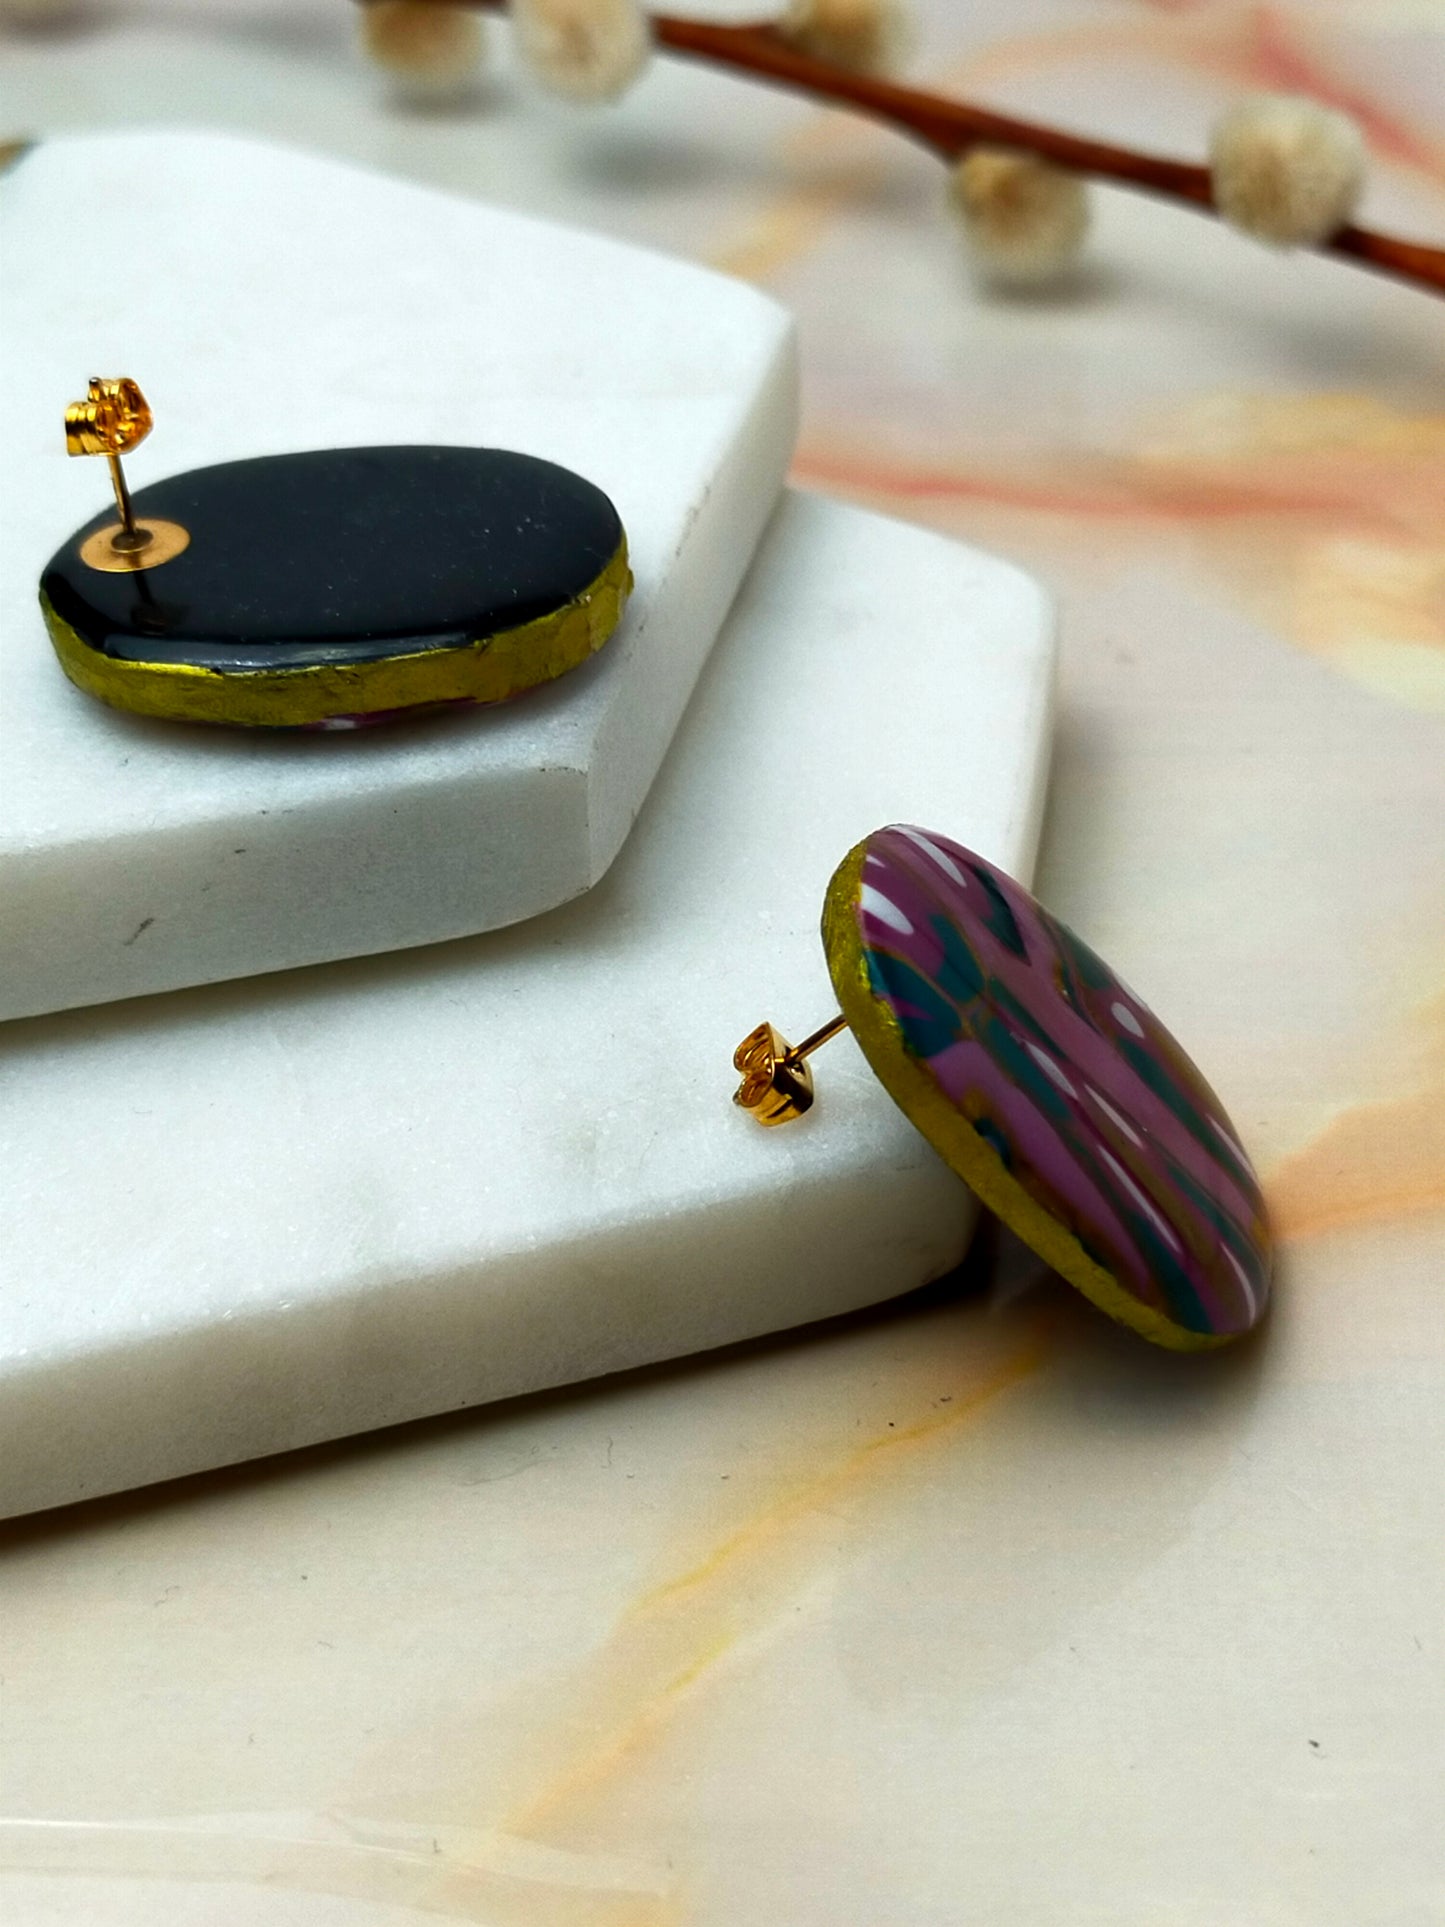 "Olivia" Abstract Large Oval Polymer Clay Stud Earrings